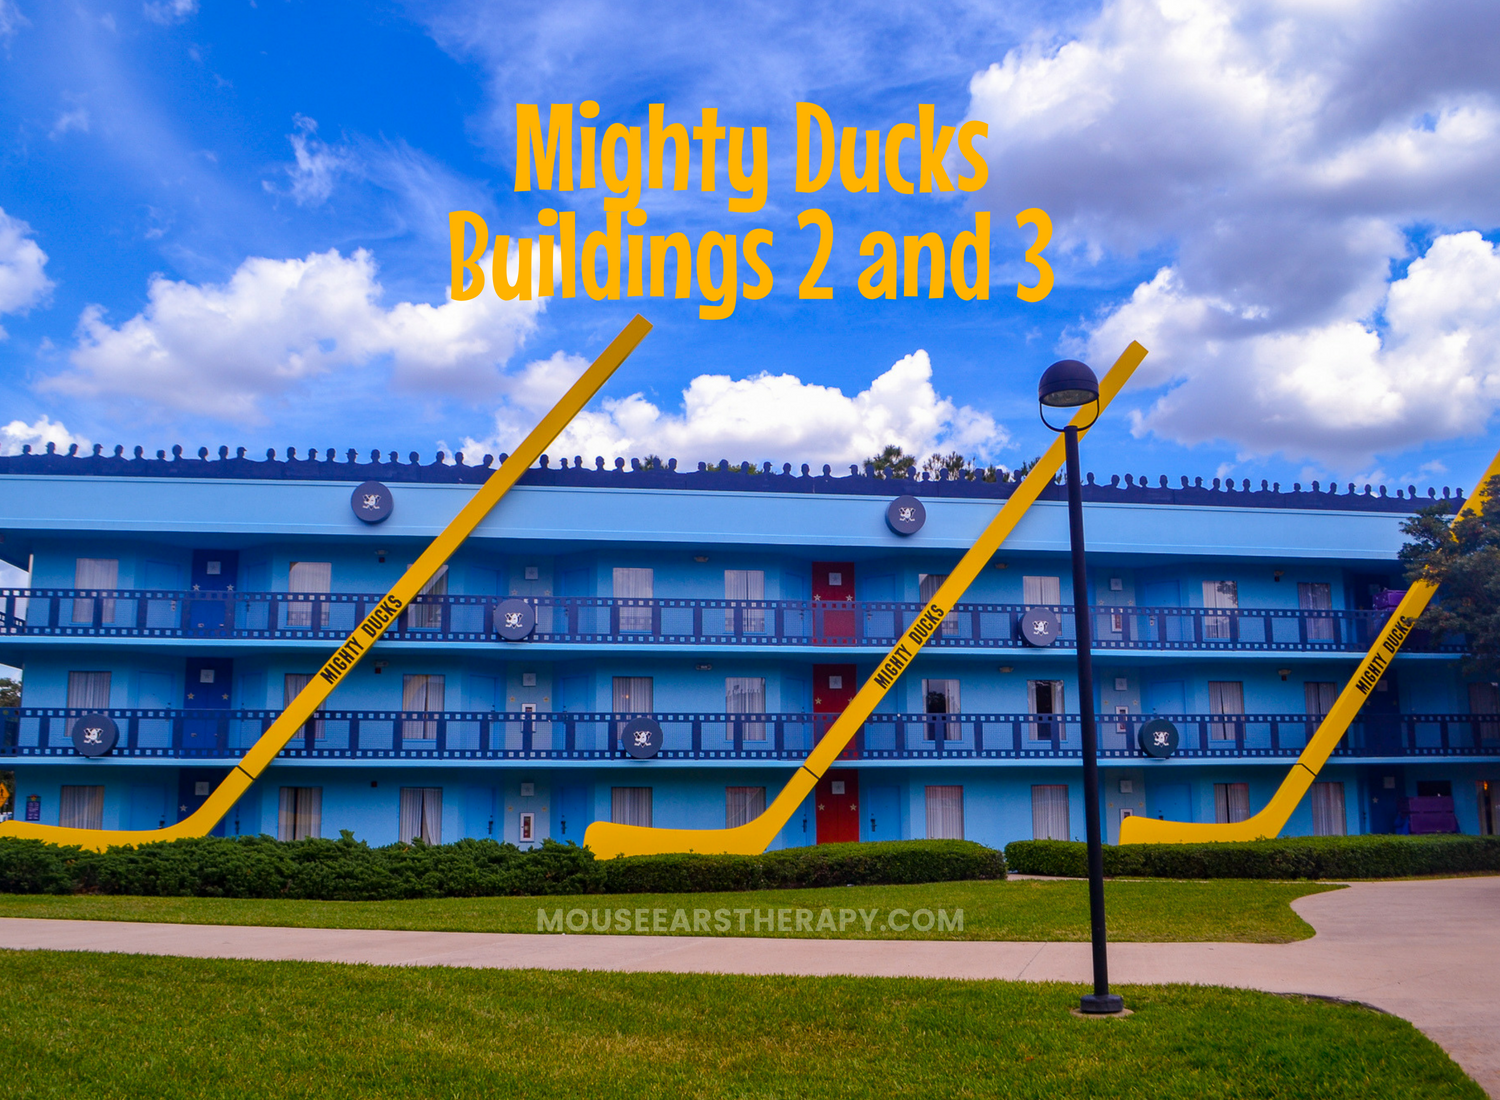 View of Mighty Ducks buildings 2 and 3 at All Star Movies value resort. 